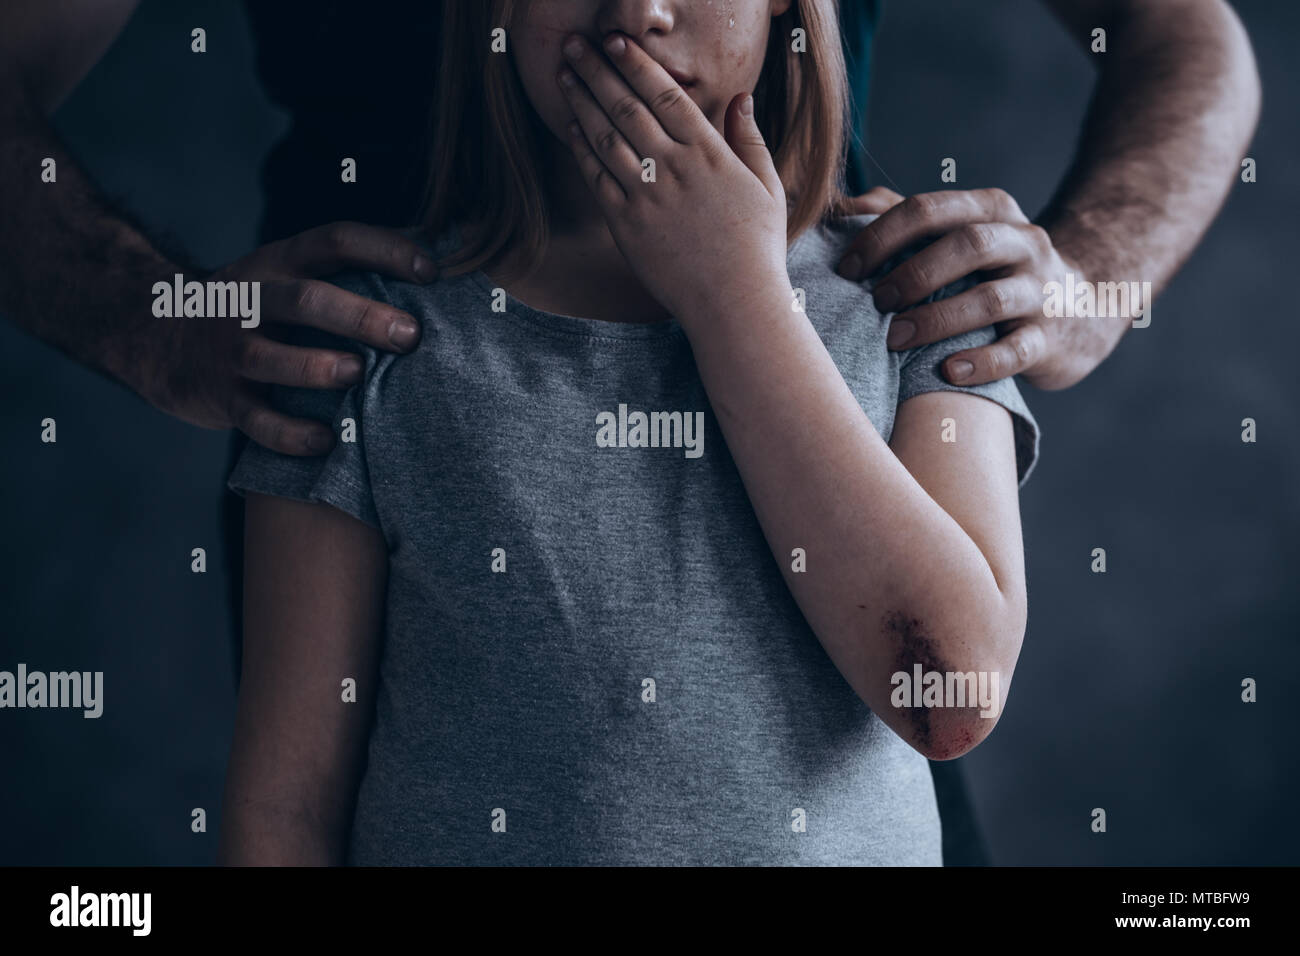 Children abuse is a crime don't be quiet about it Stock Photo